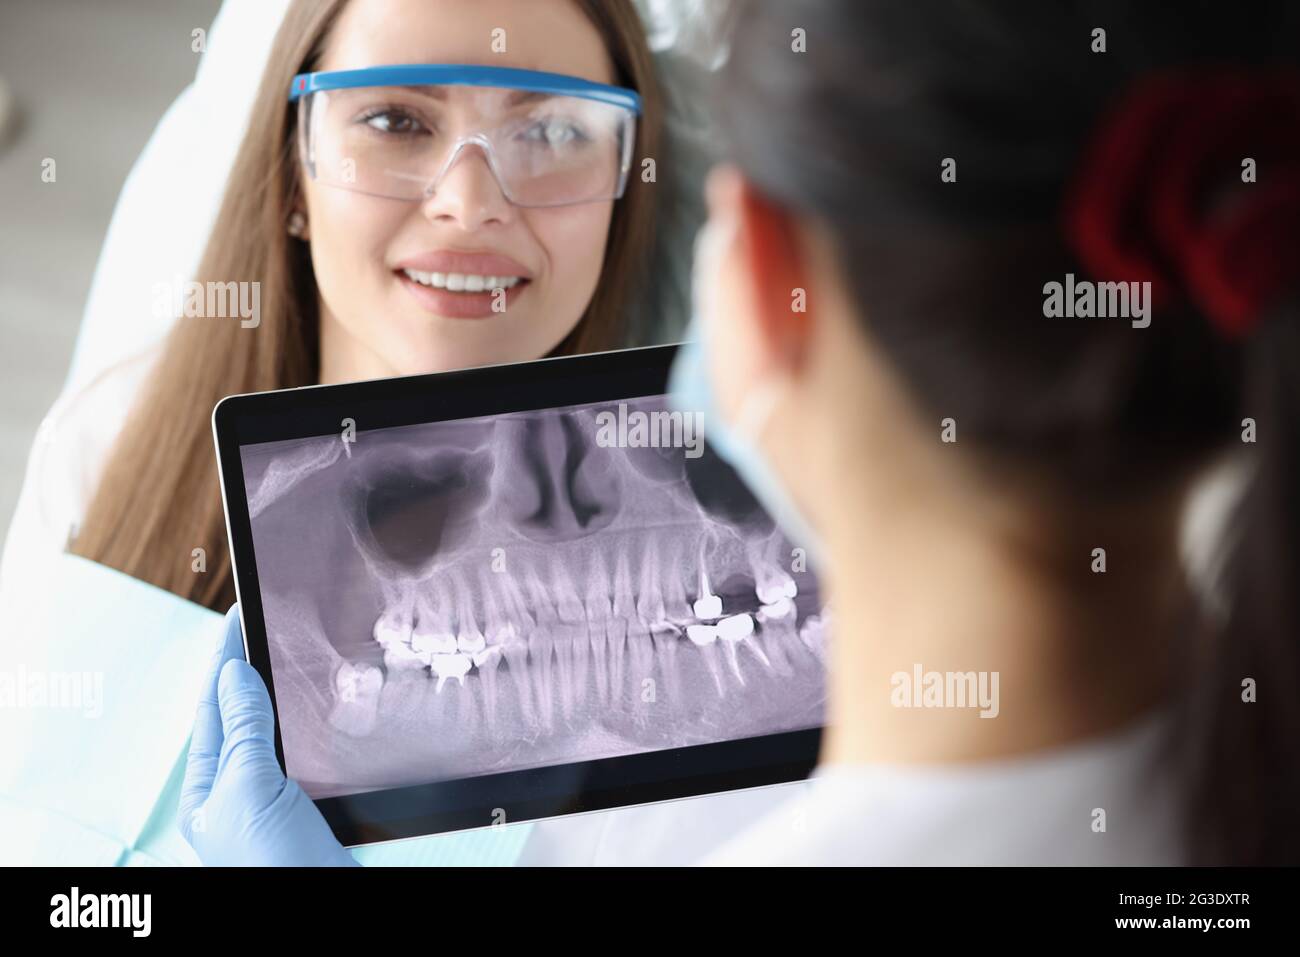 Dentist doctor examines X-ray picture on tablet screen in chair is ...